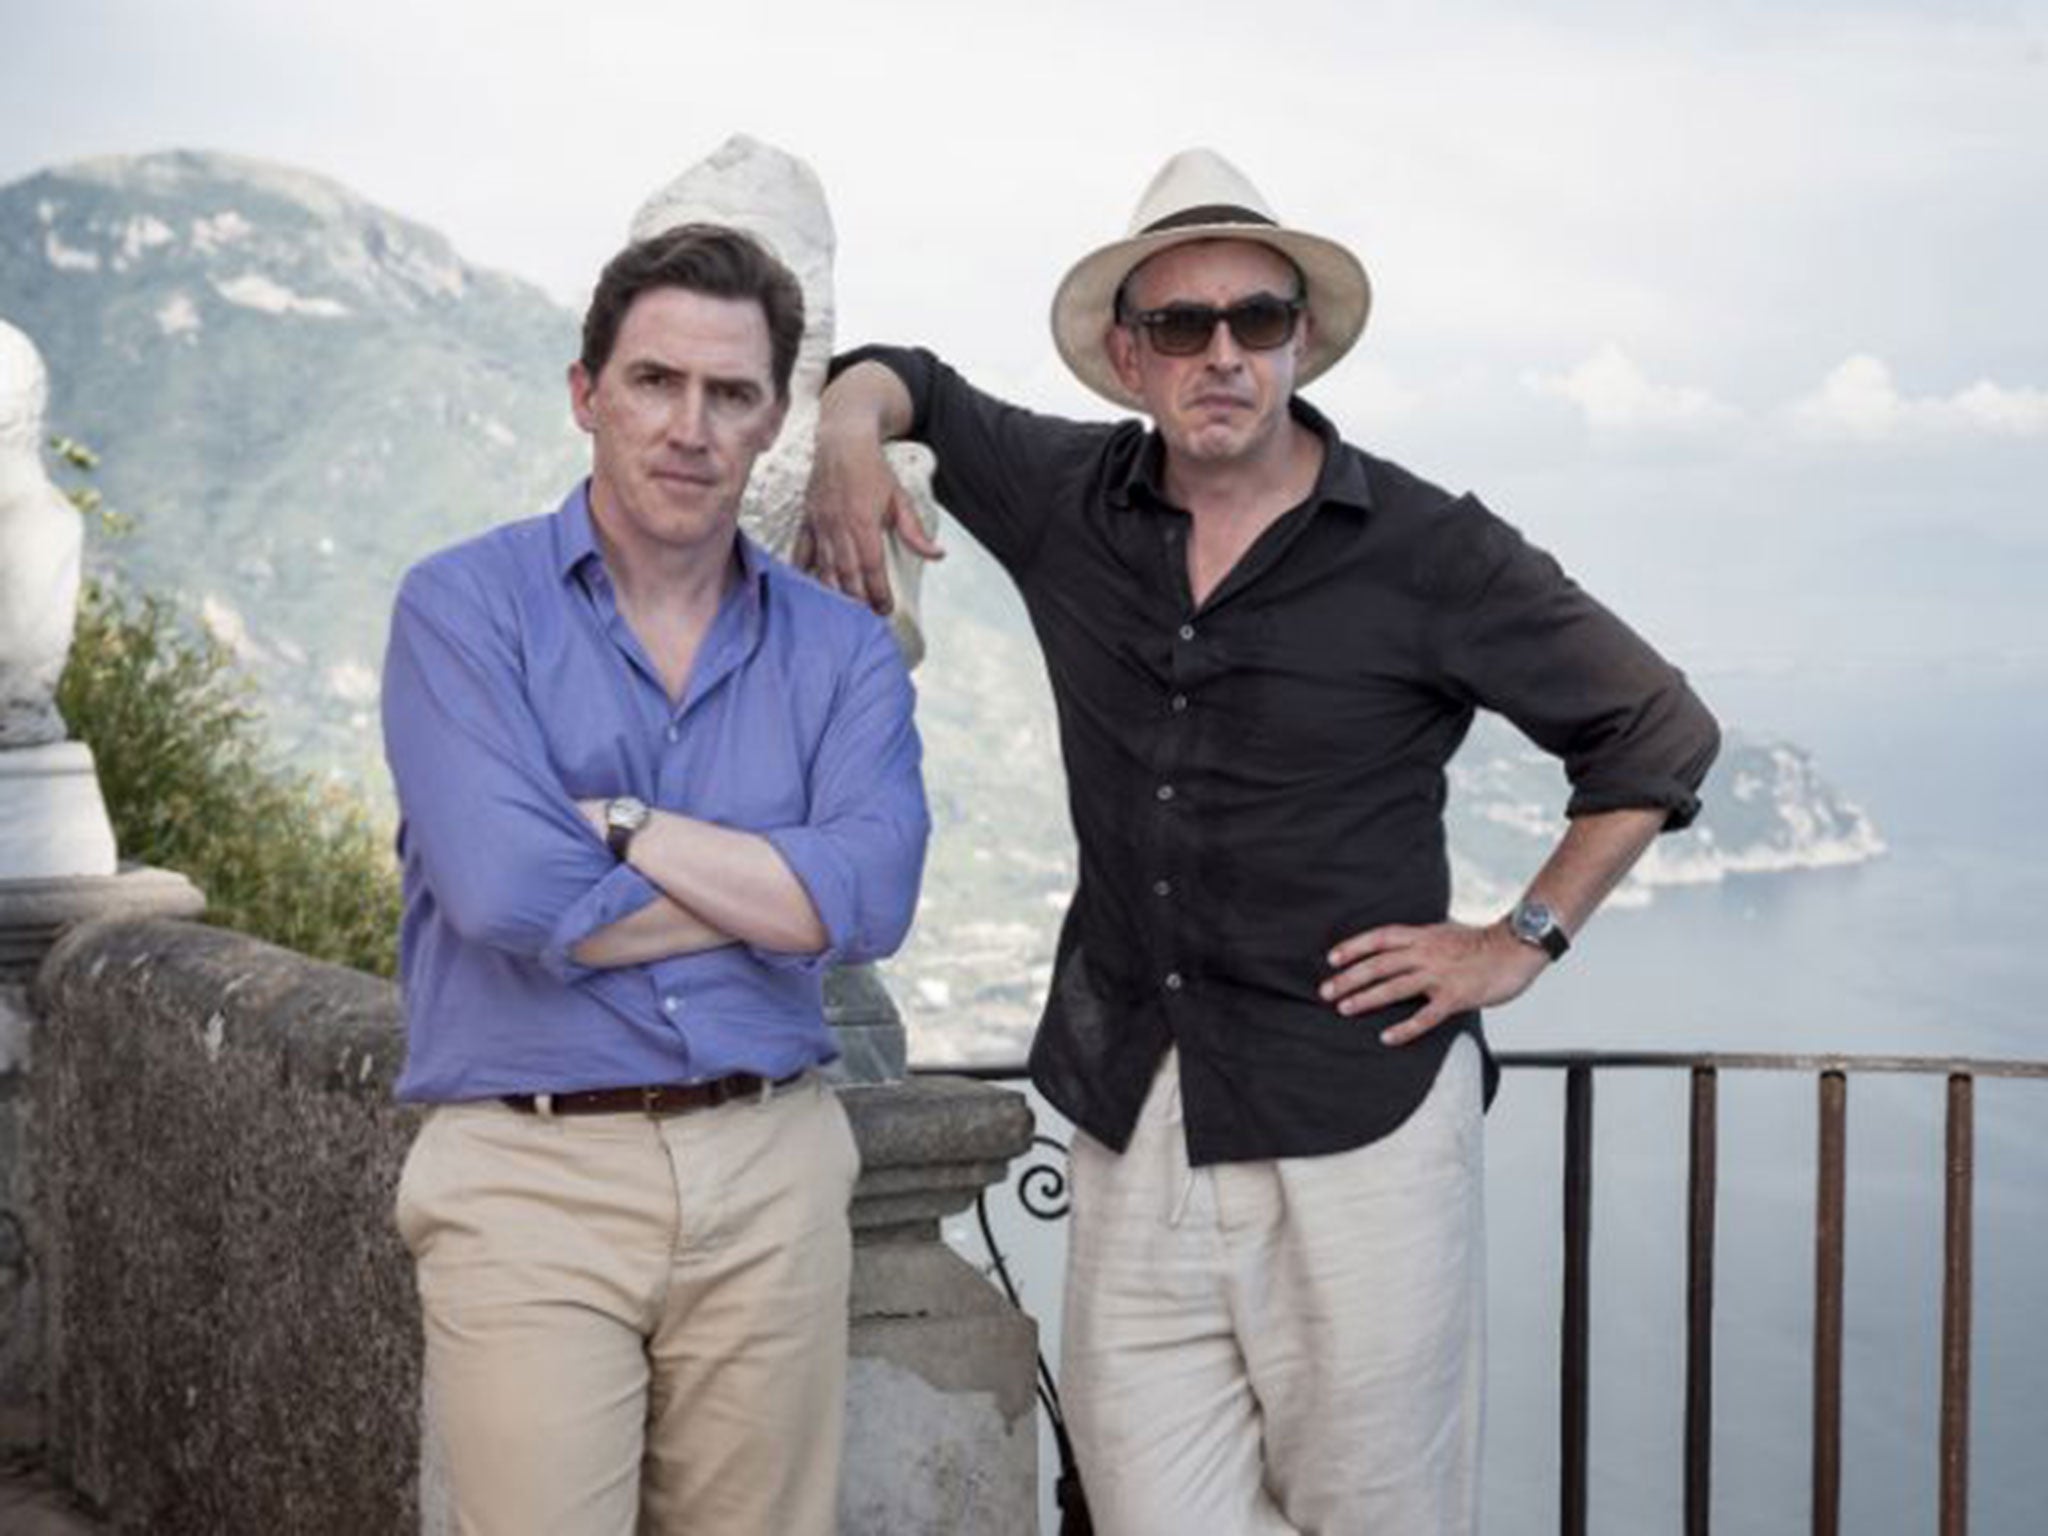 Rob Brydon and Steve Coogan in The Trip to Italy